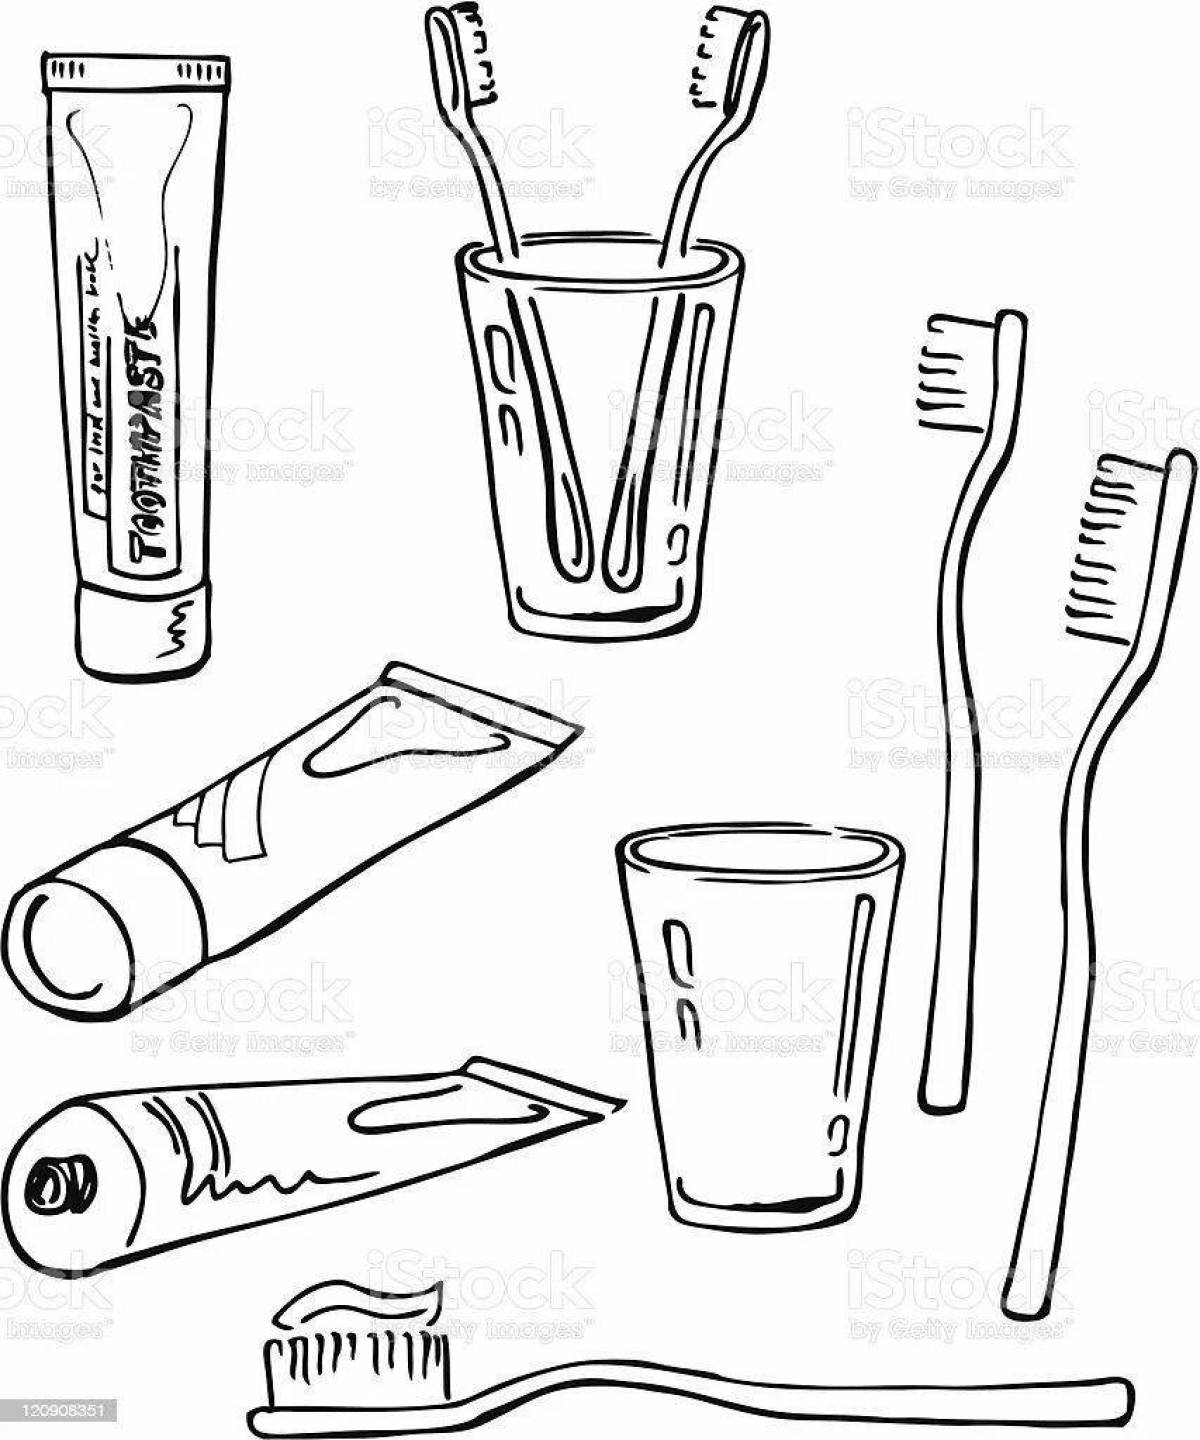 Coloring page stylish bathroom accessories